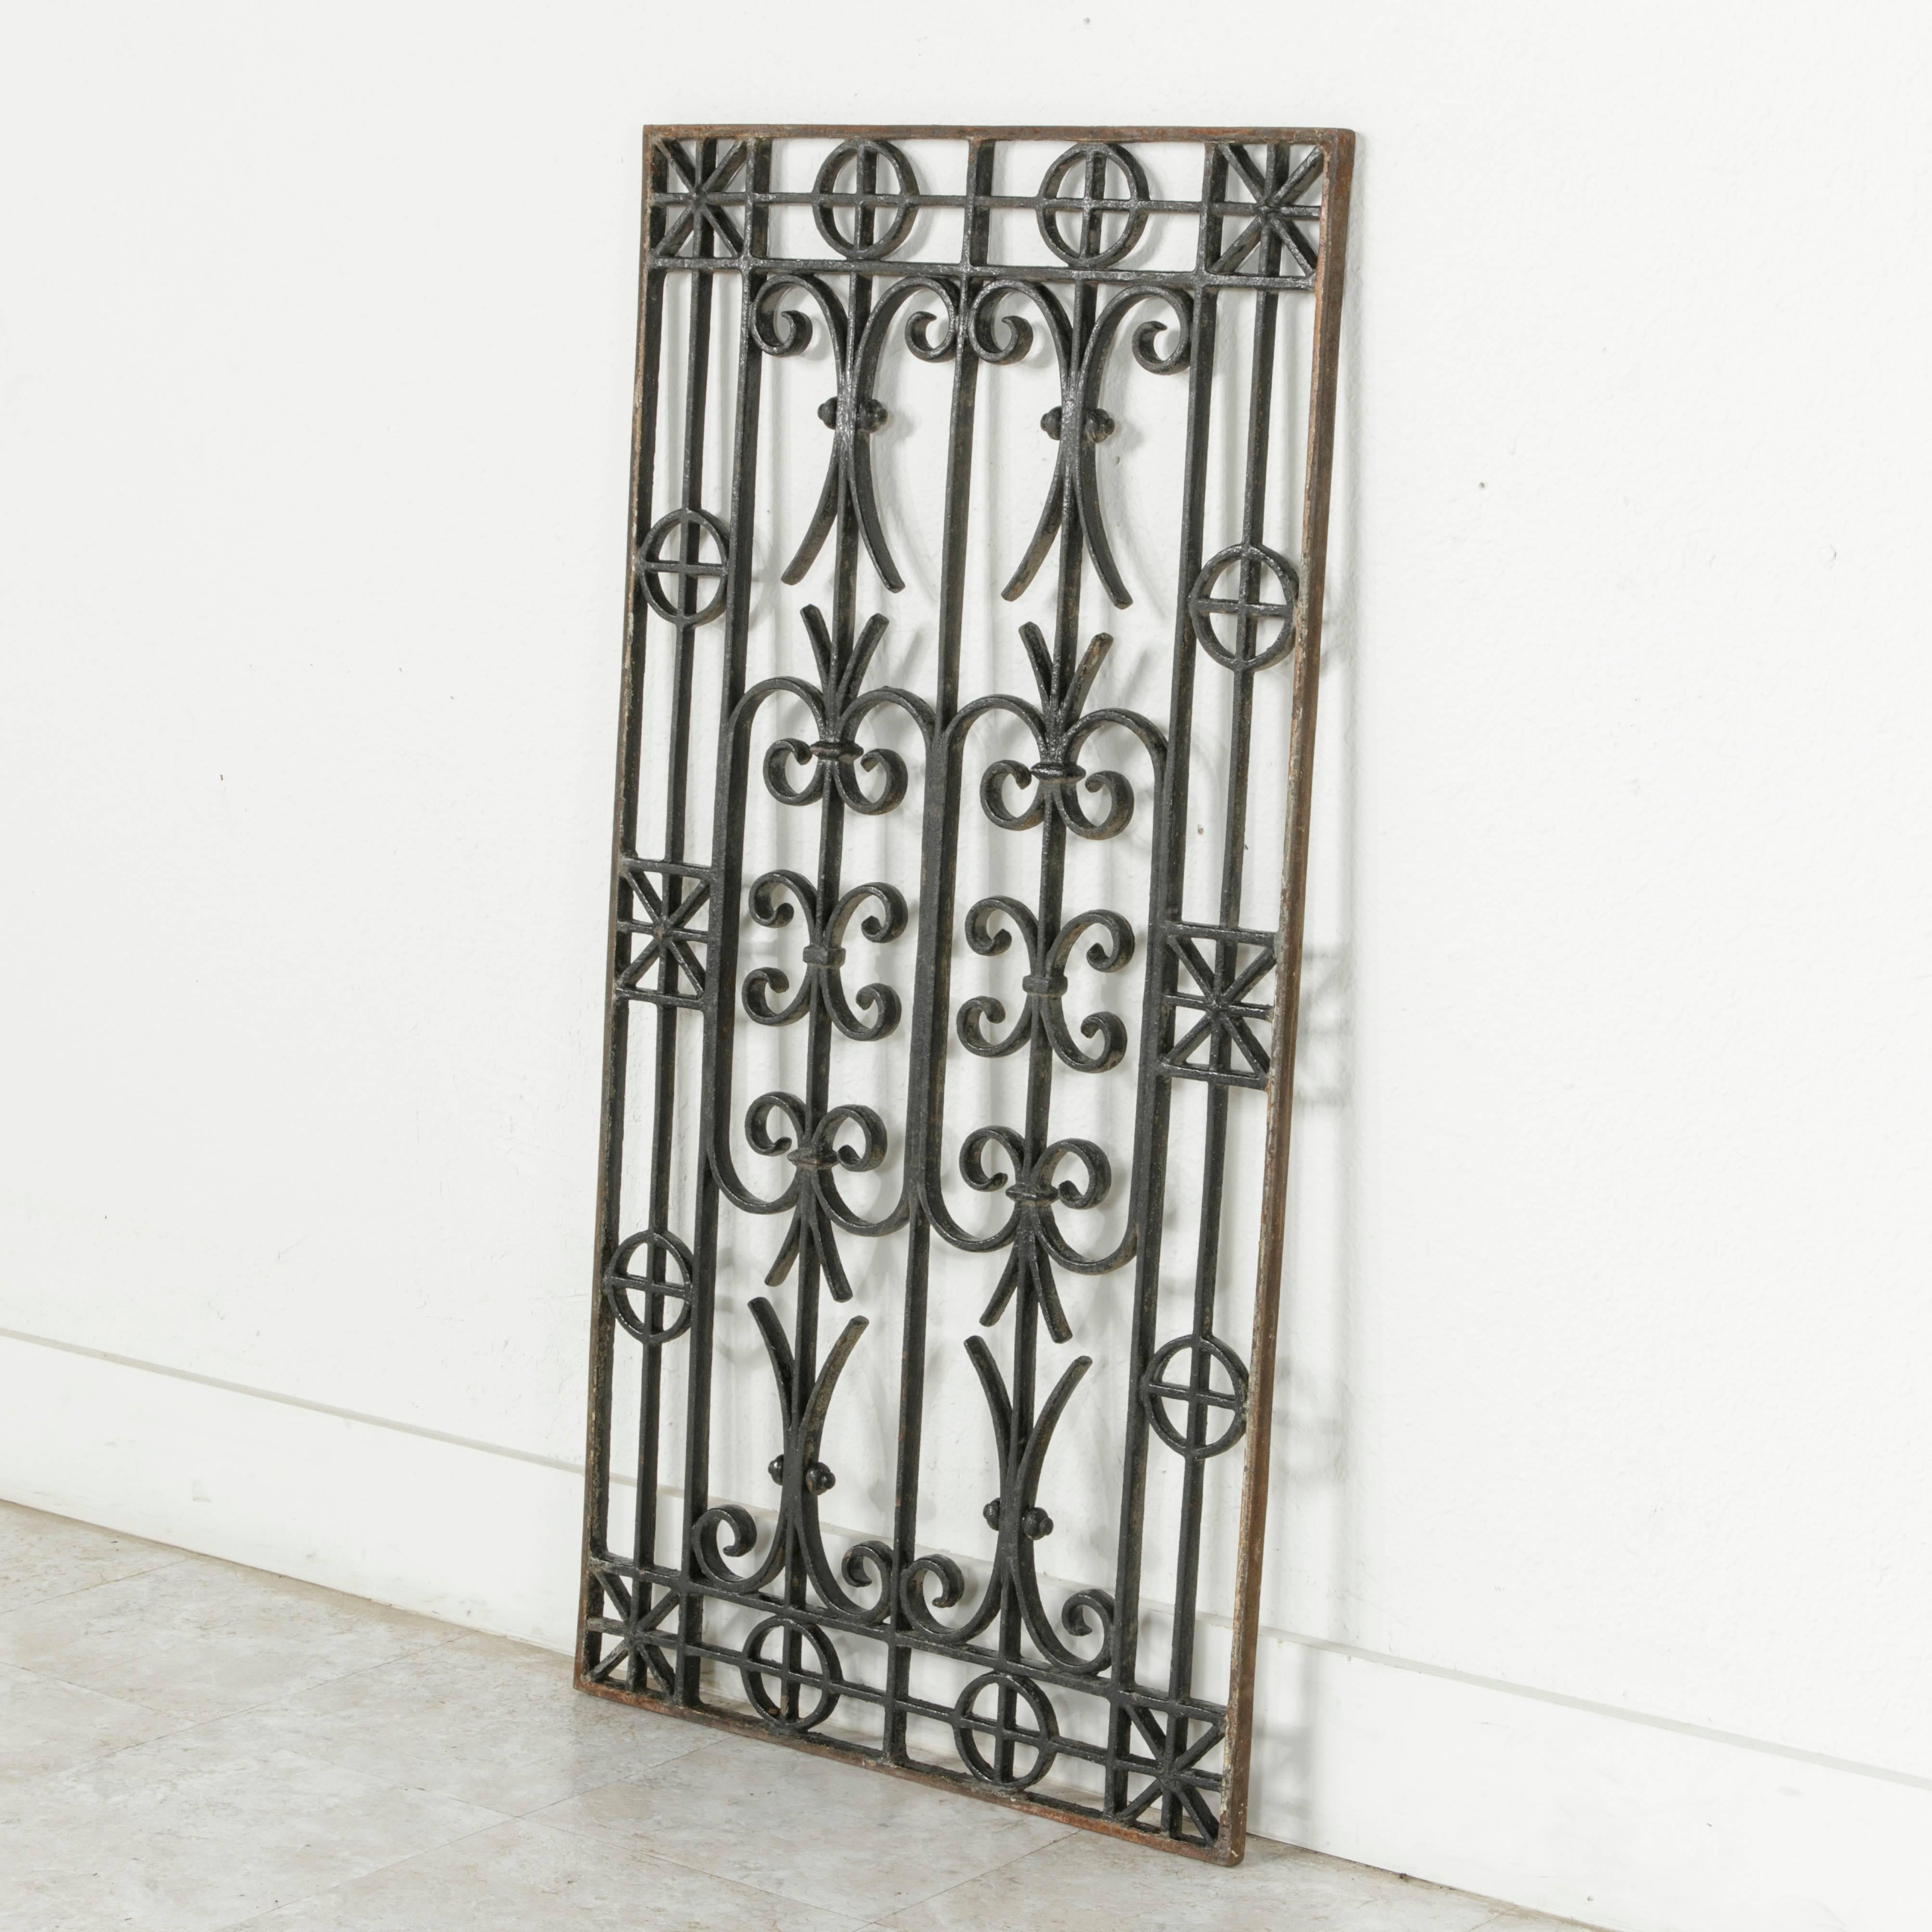 This late 19th century cast iron grill or grate features a design of intricate scrolling with a border of geometric shapes. With its symmetrical design, it can be hung on a wall in either the horizontal or the vertical. It is also ideal for